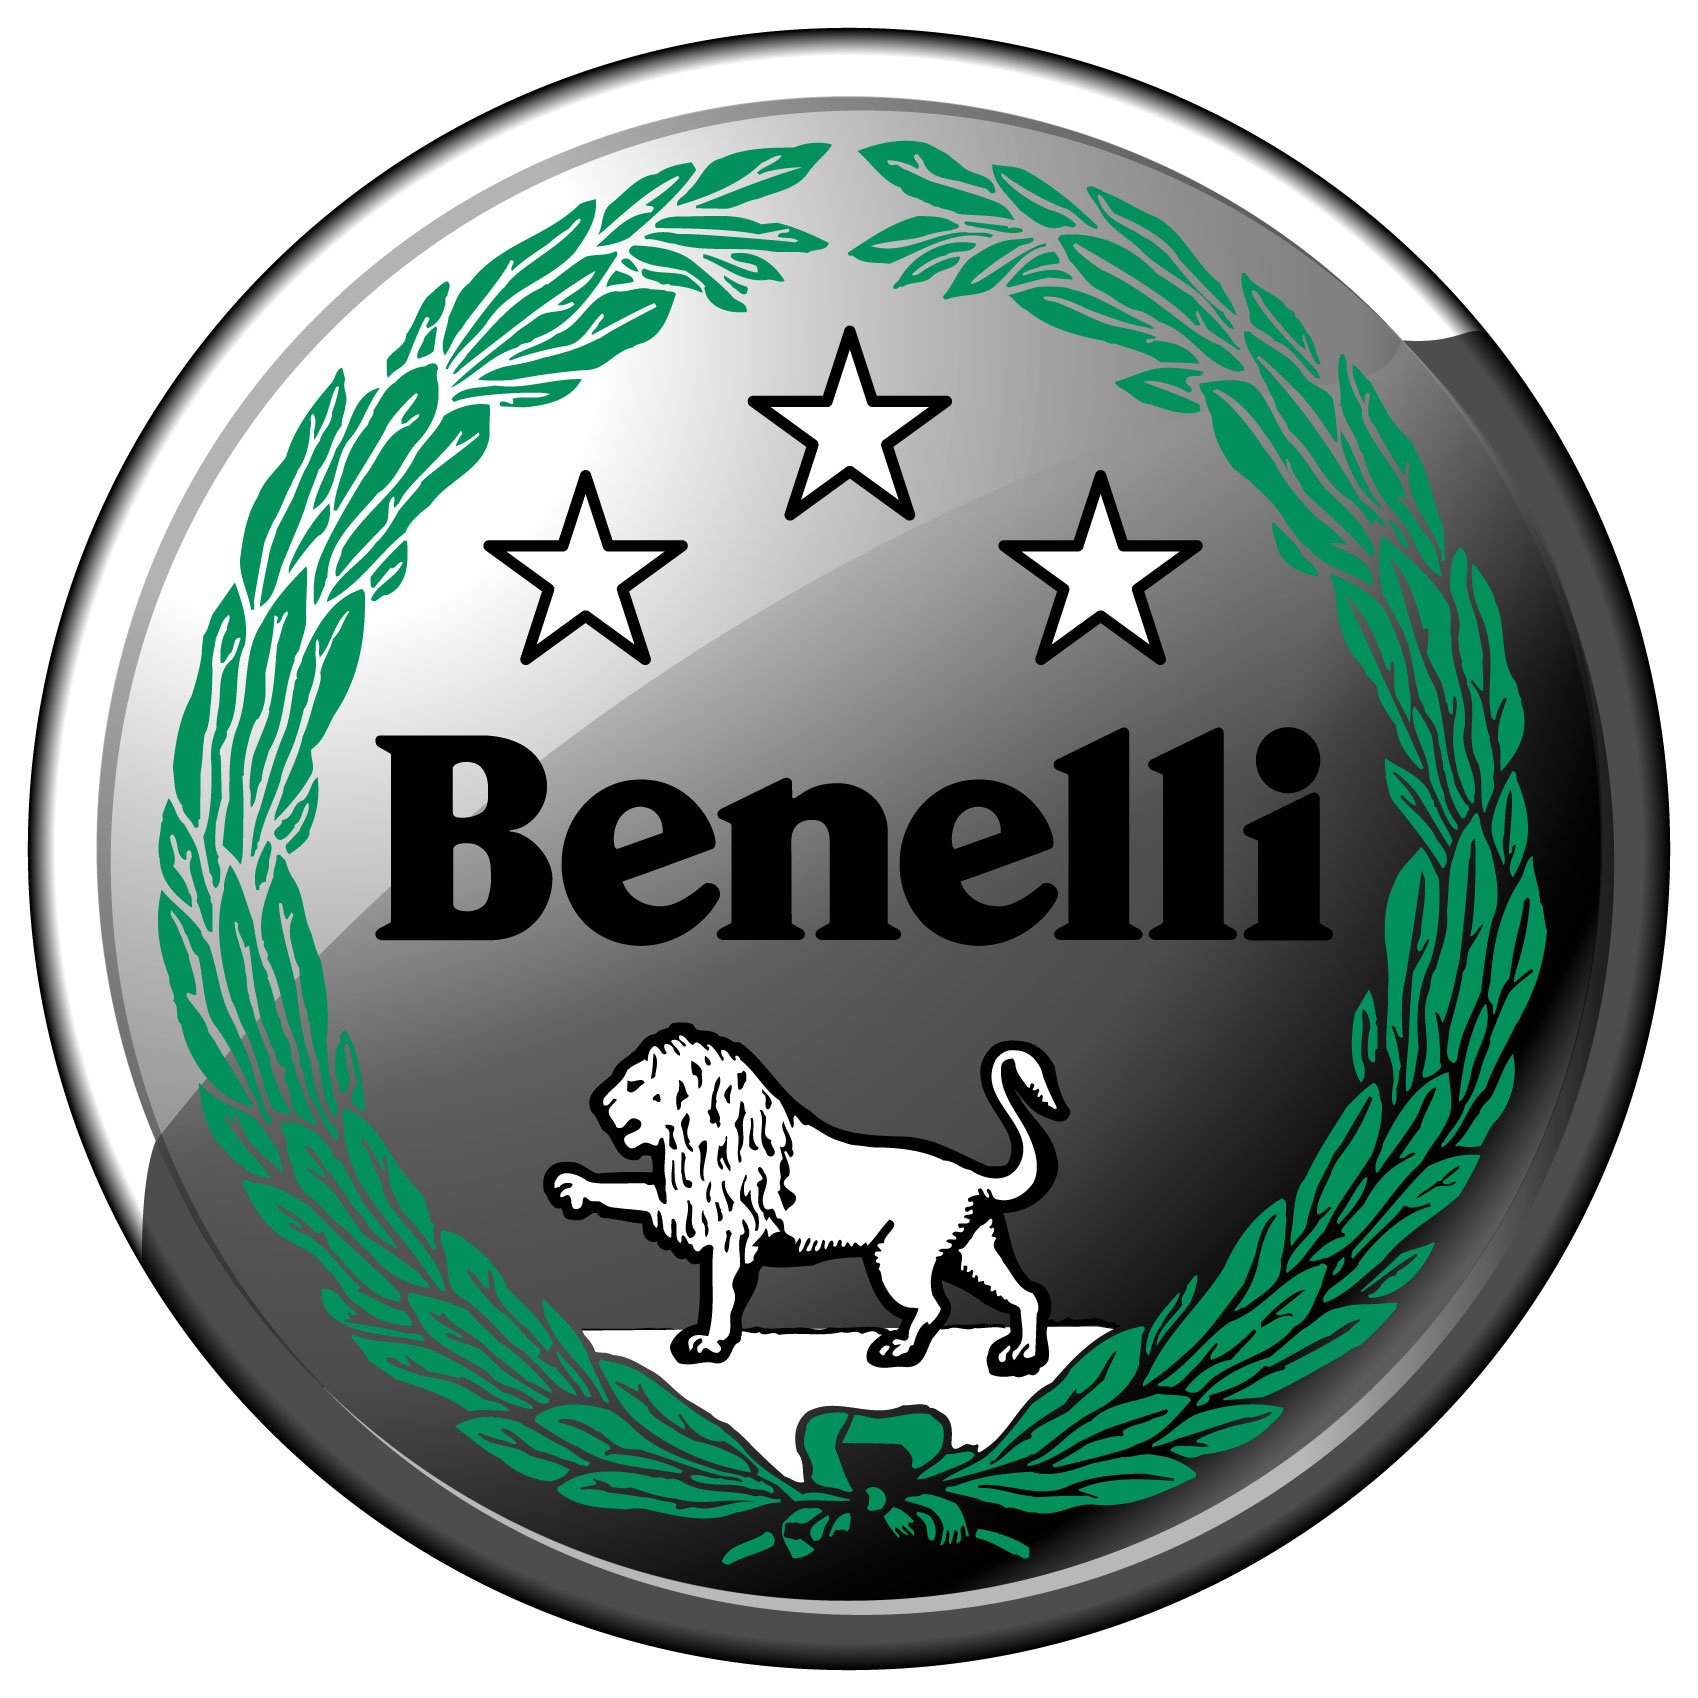 Car Price Performance and Hairstyle: benelli logos